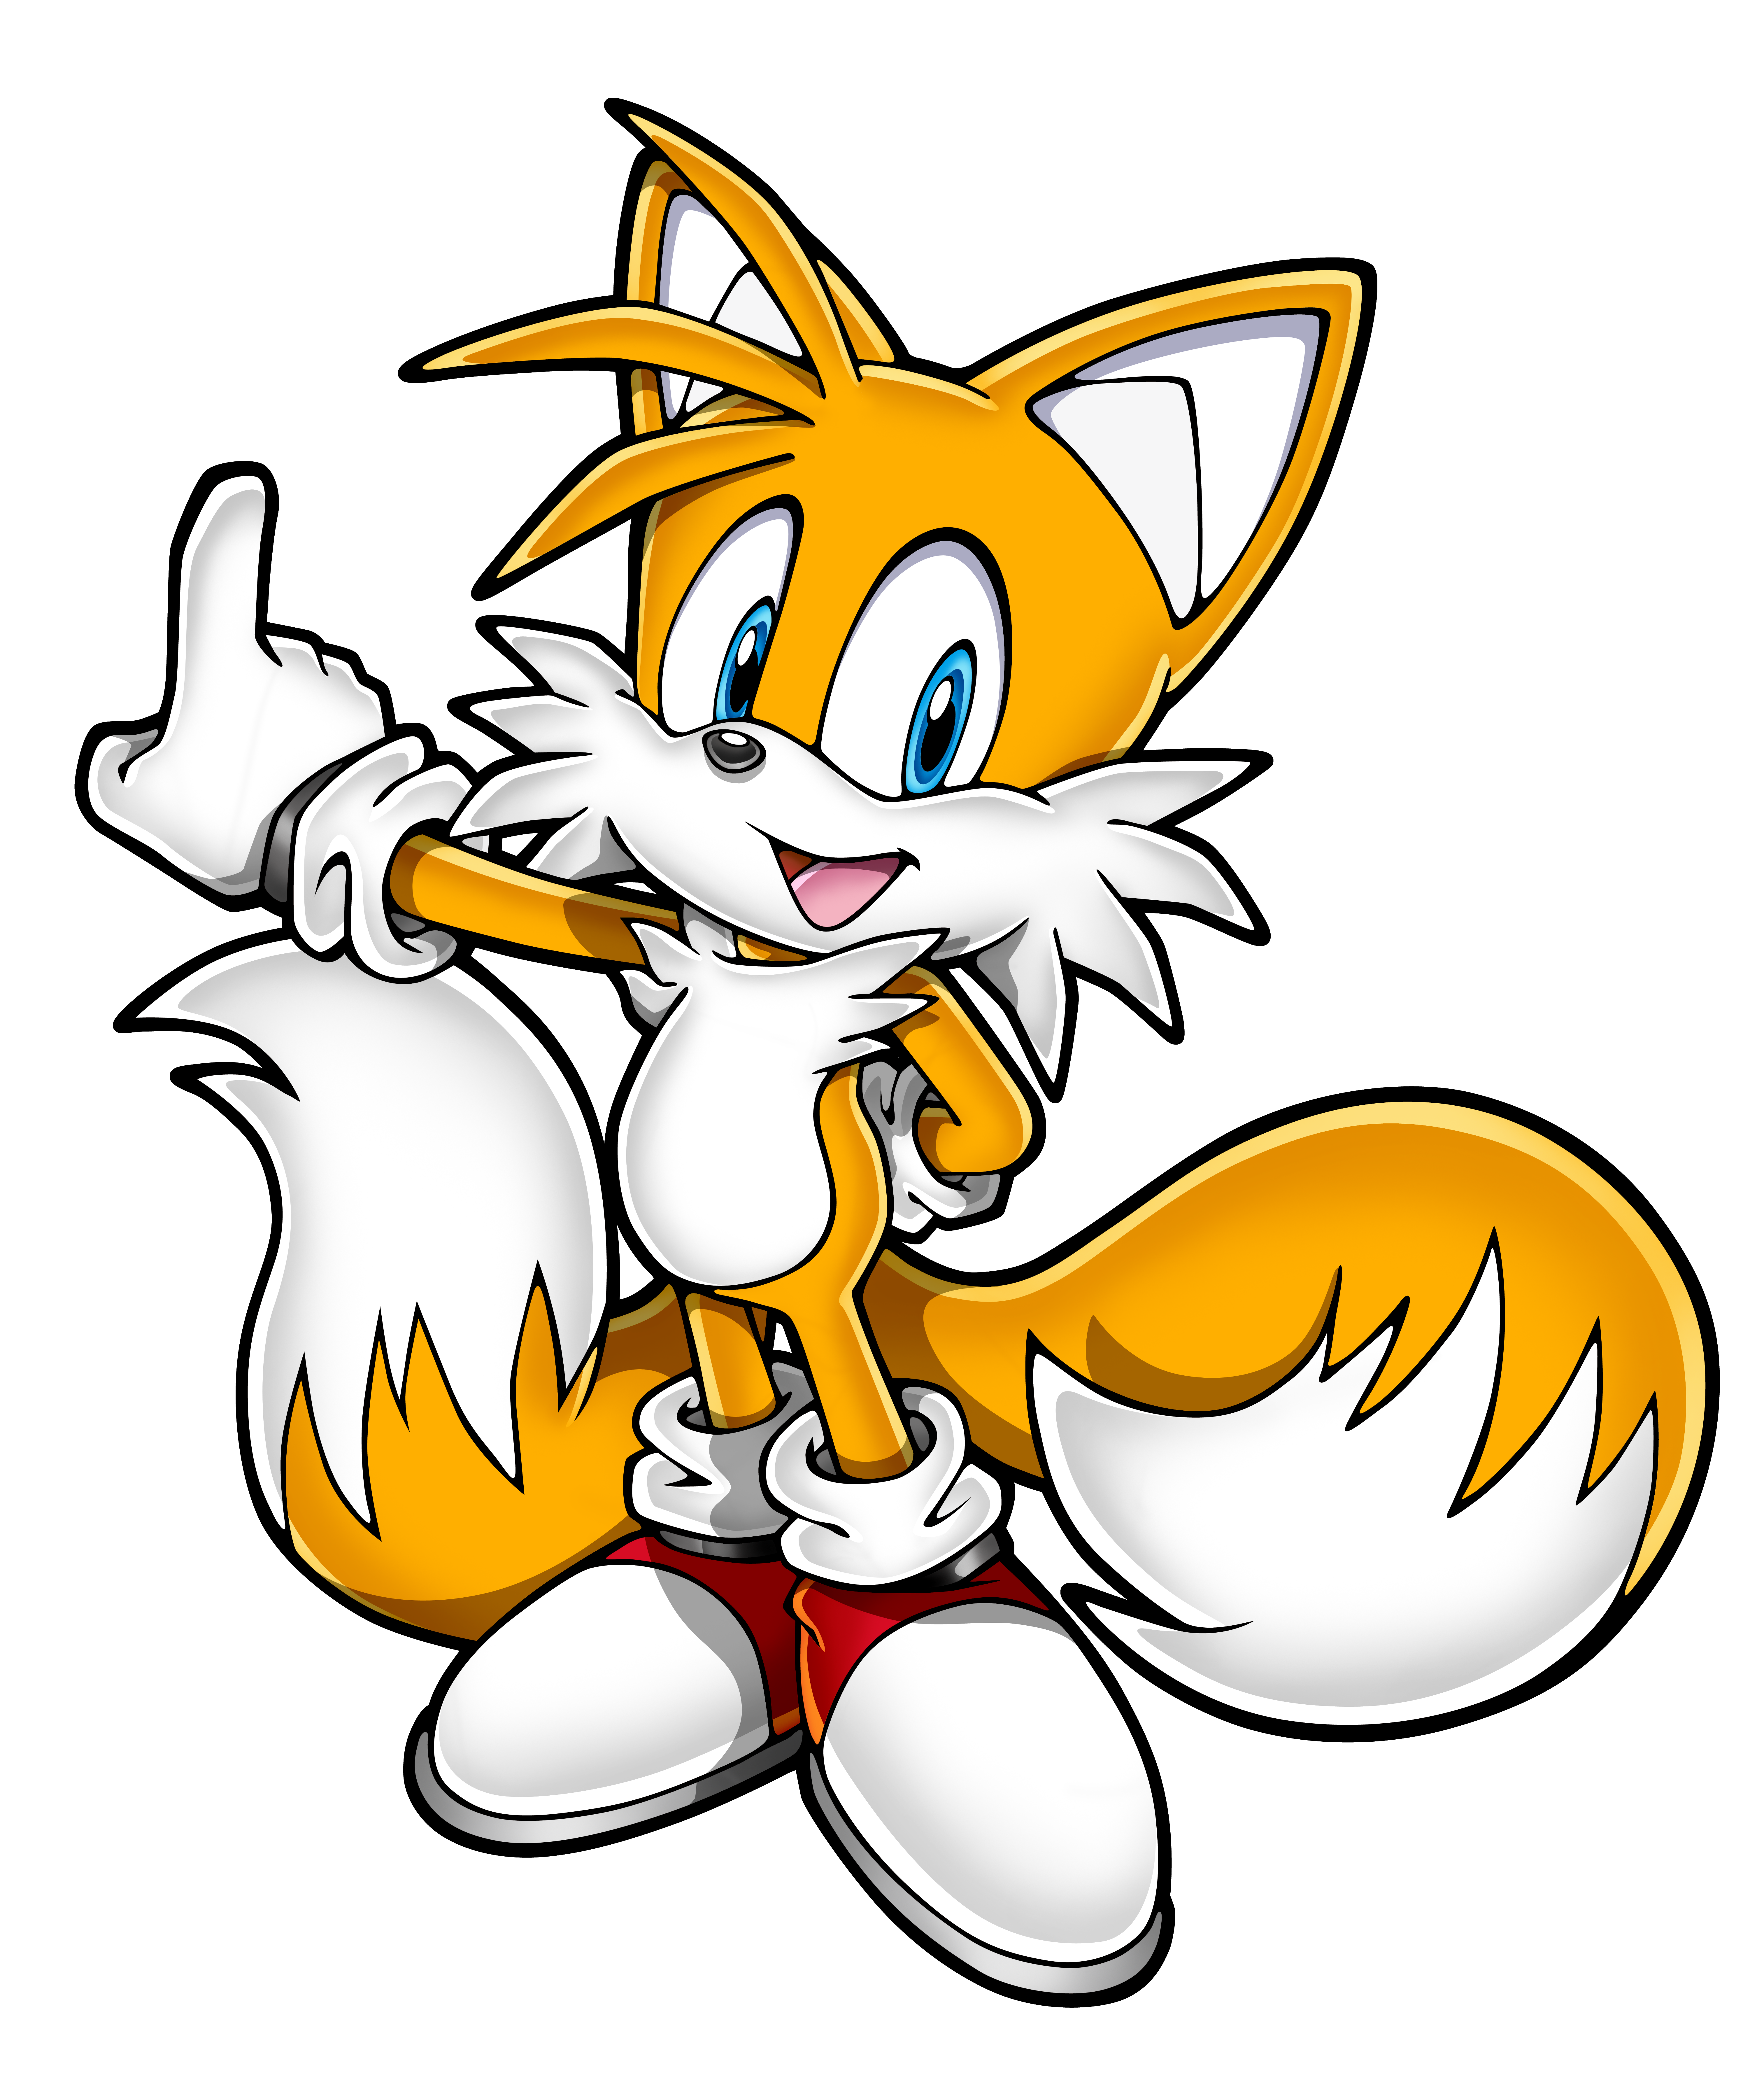 download tails adventure 2